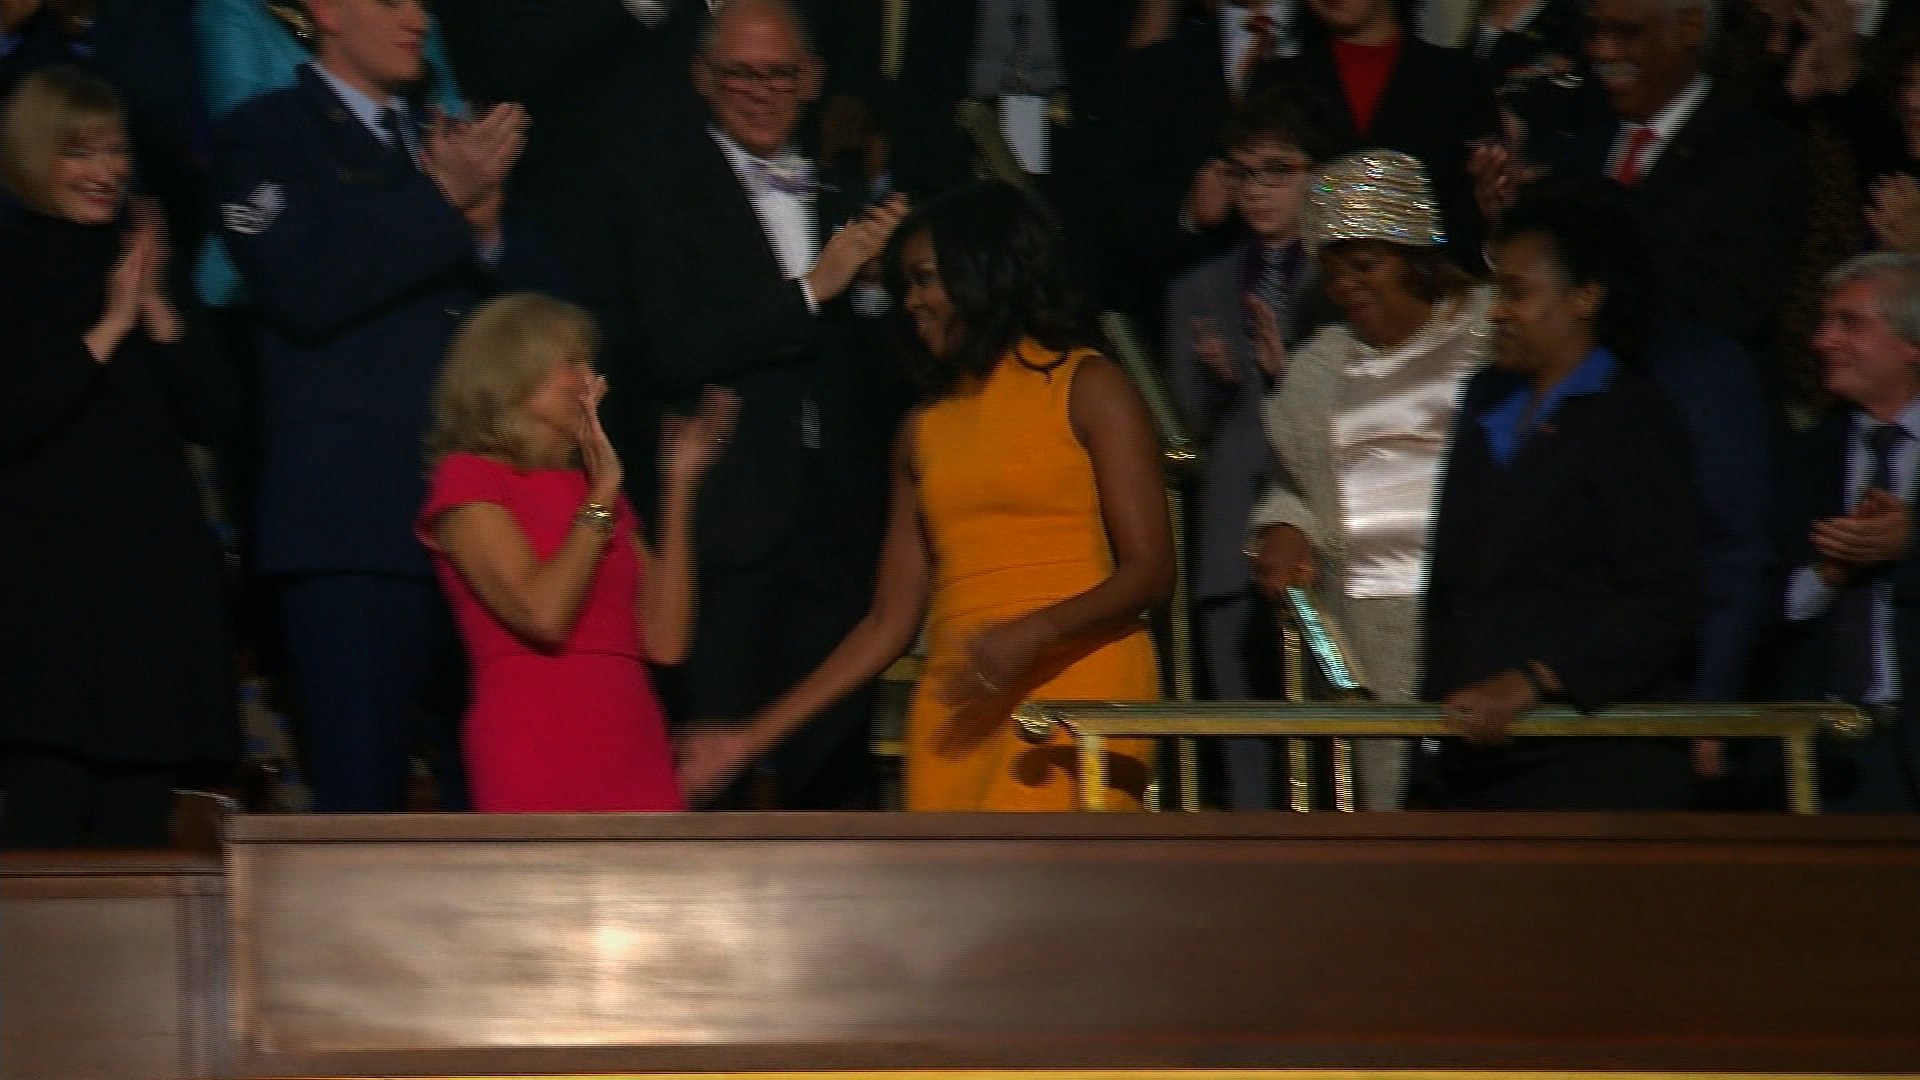 First Lady Michelle Obama greets Jill Biden, wife of Vice President Joe Biden before President Obama's final state of the union address.